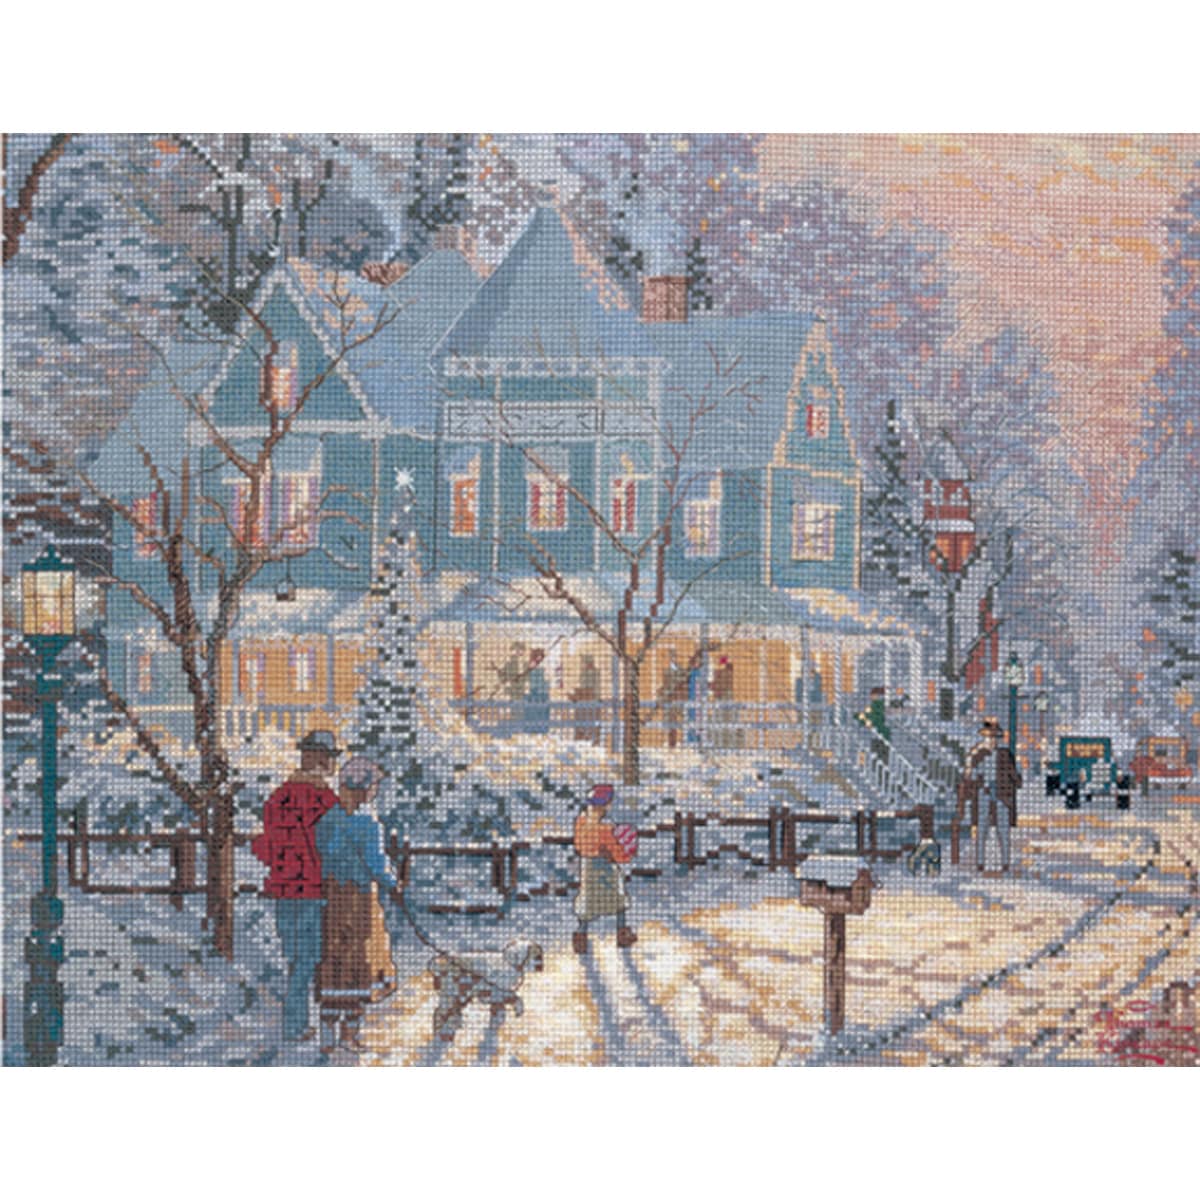 Thomas Kinkade Holiday Gathering Counted Cross Stitch Kit 14 X11 14 Count Overstock 6754510